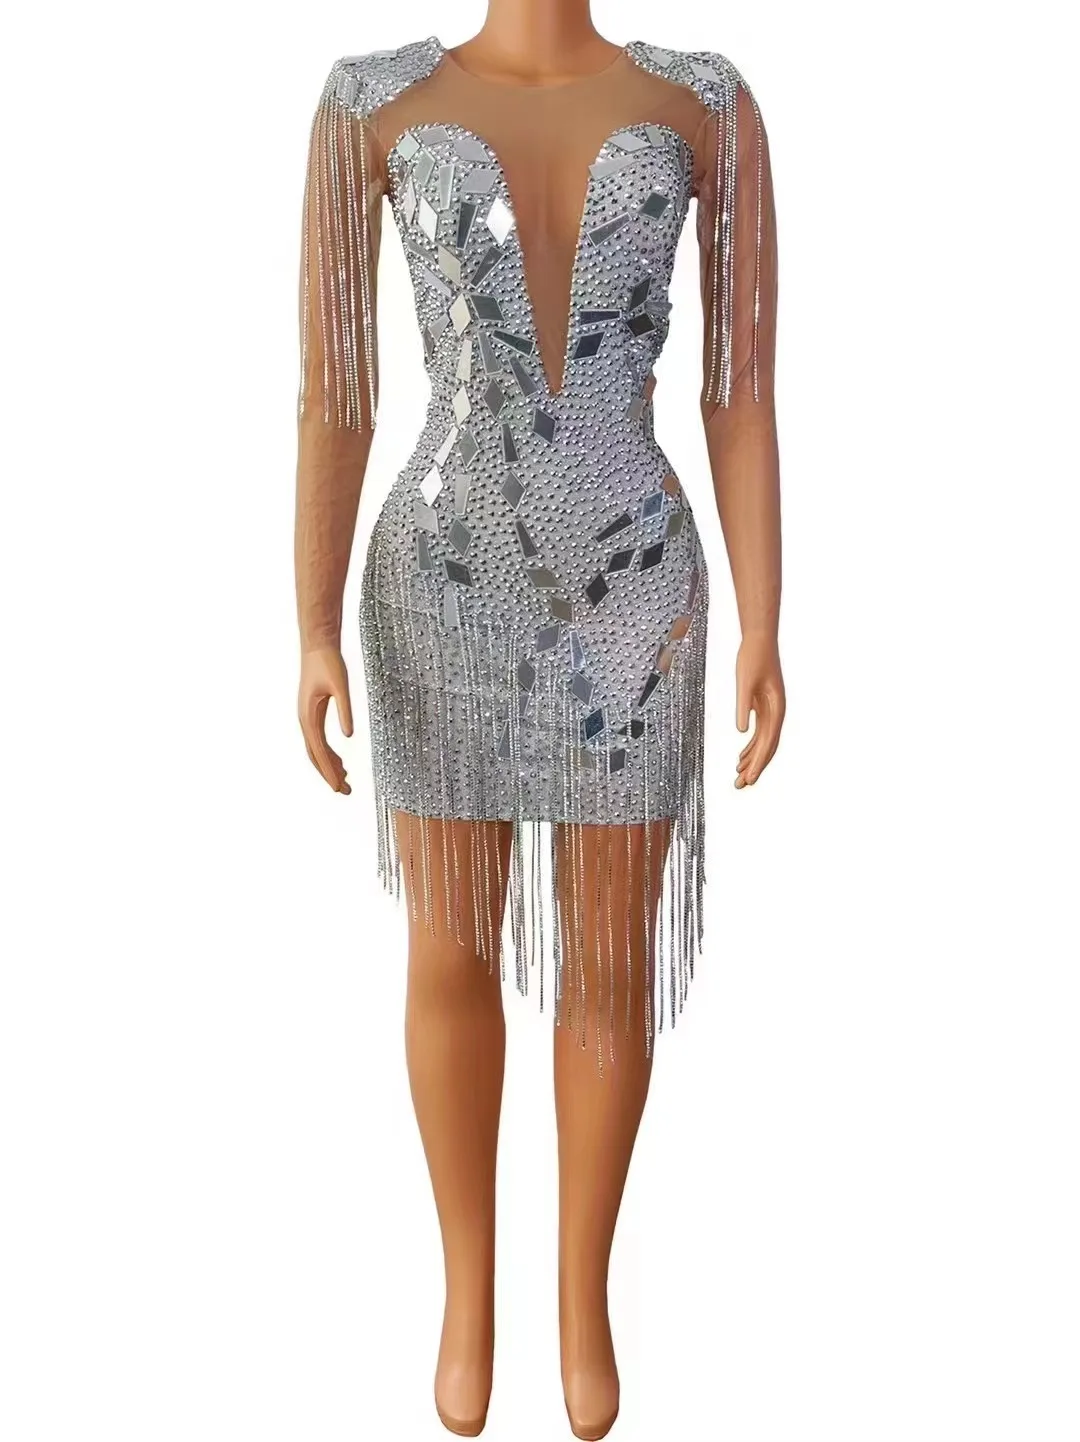 

Sexy See Through Birthday Costume Party Celebrate Fringes Dress Women Nightclub Outfit Silver Mirrors Crystals Chains Mesh Dress